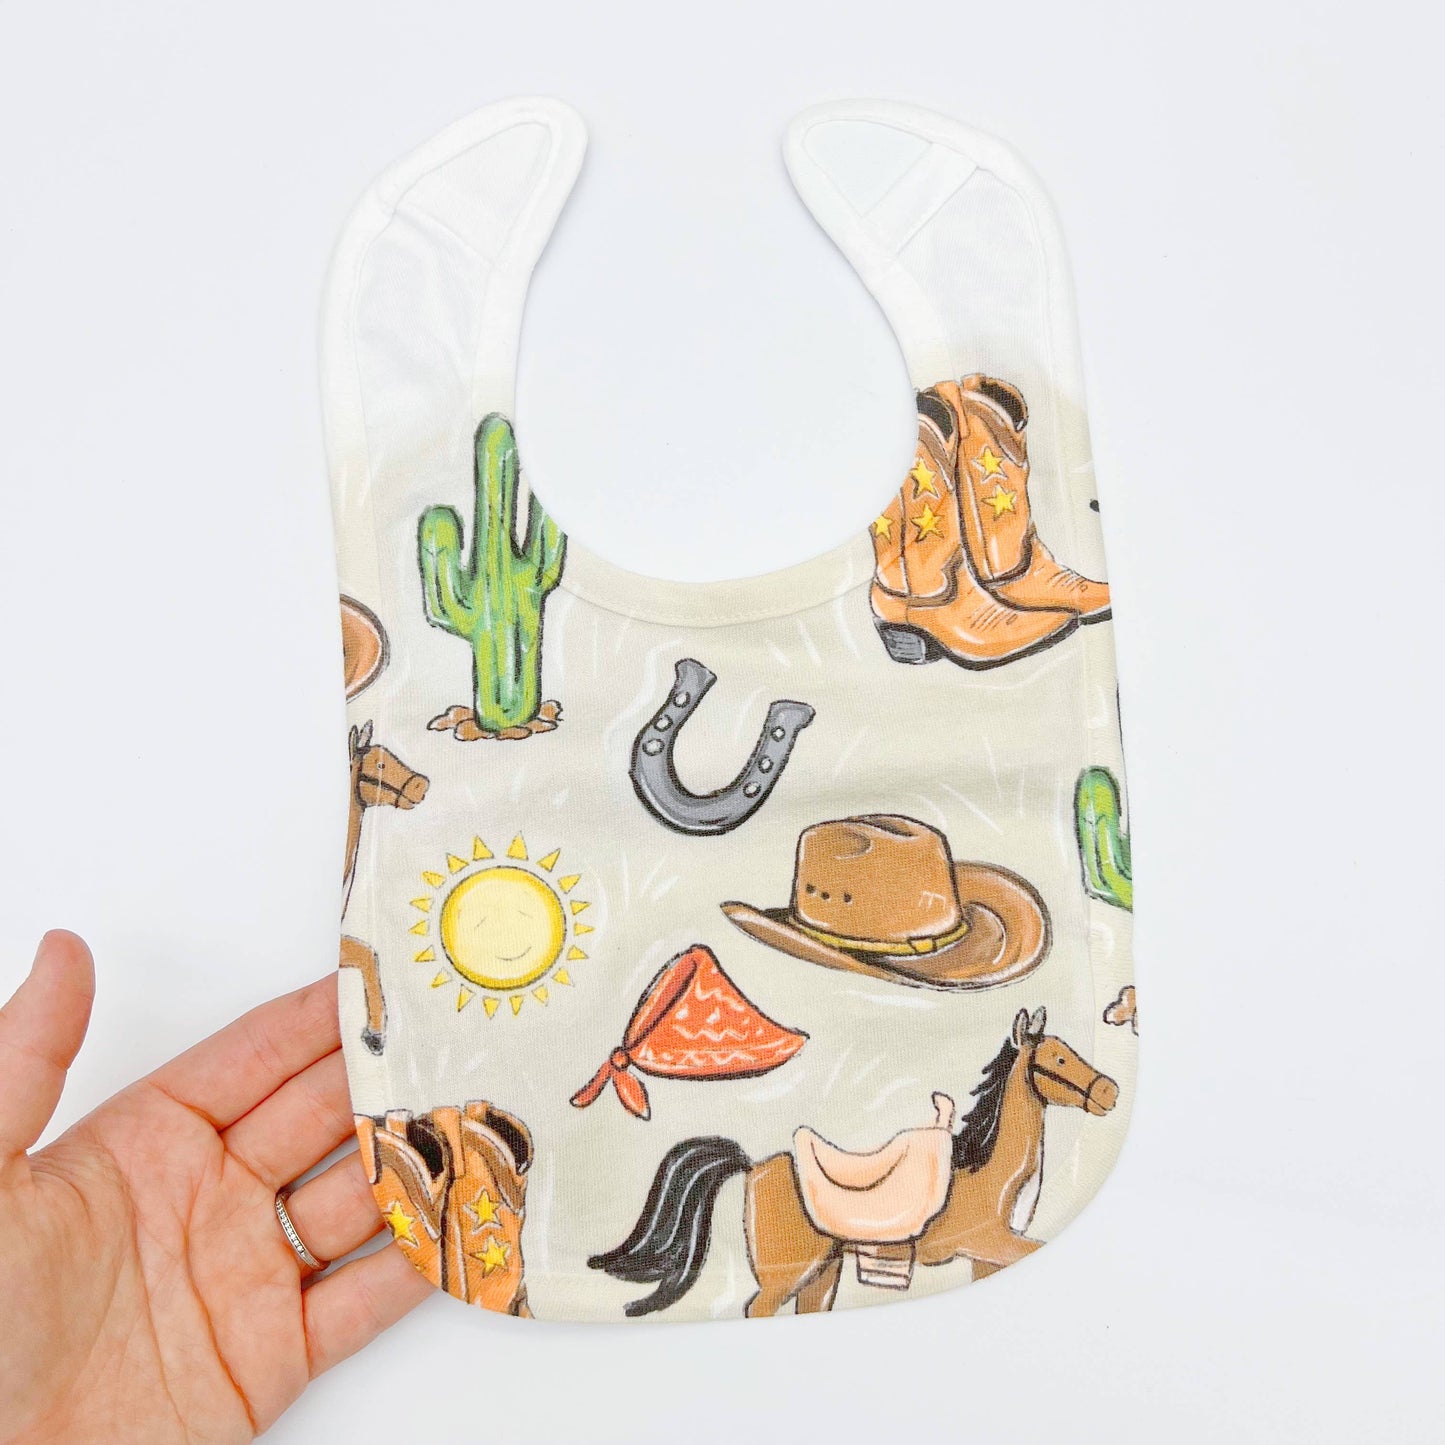 Western Cowboy Baby Bib - Baby Shower Gift New Baby Arrival